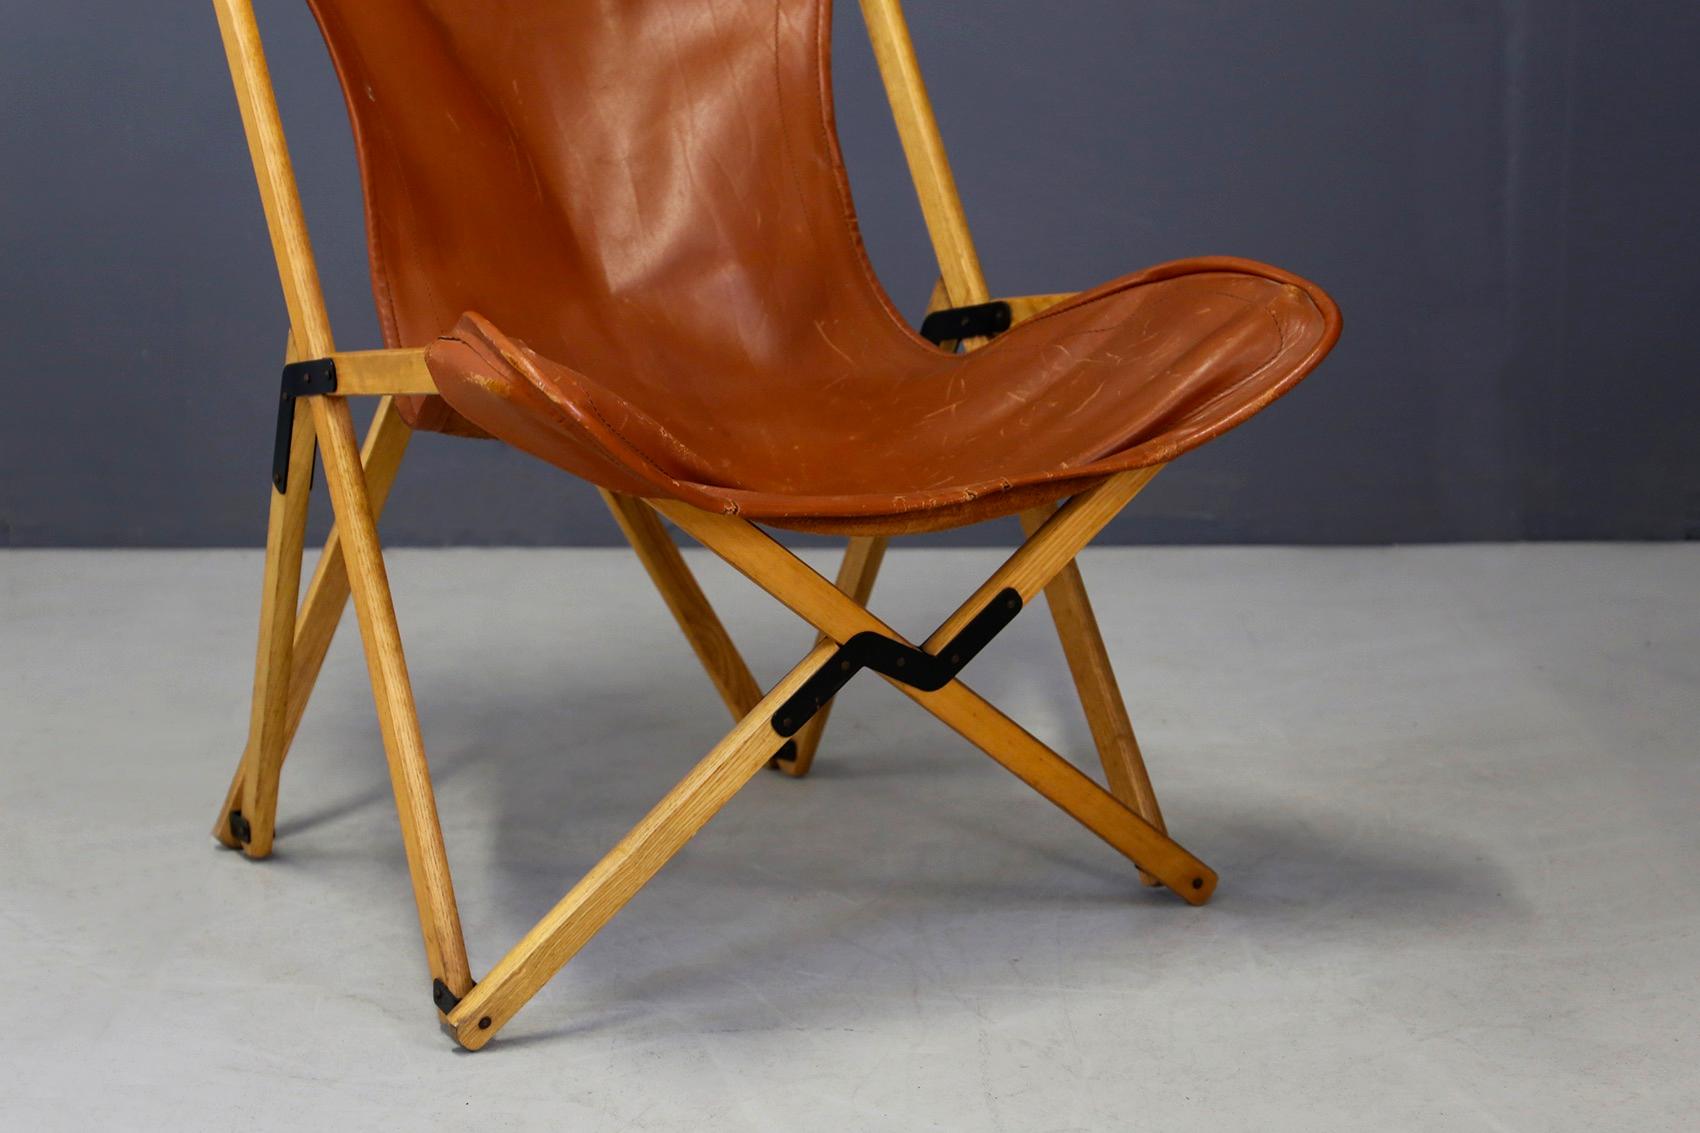 Tripolina Folding Chair by Viganò in Leather and Teak from circa 1970s 2